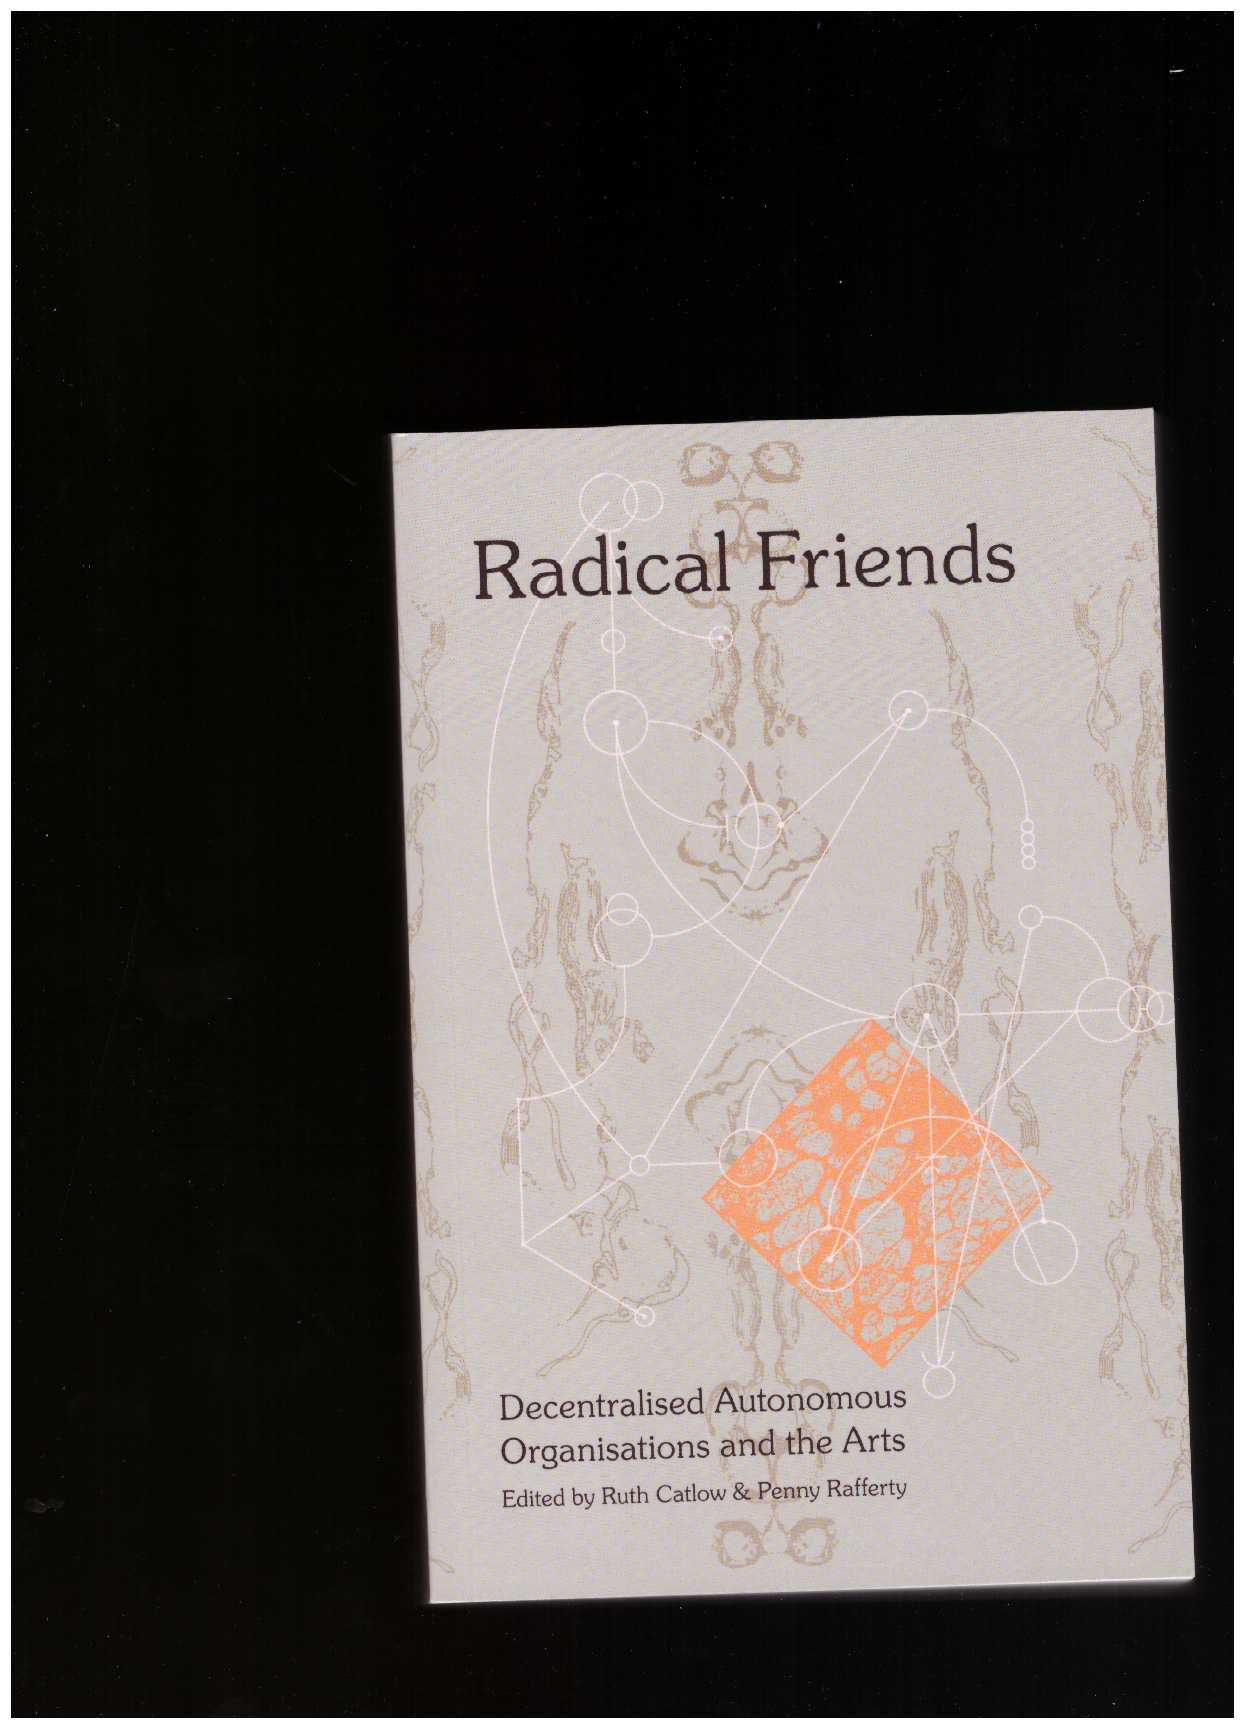 CATLOW, Ruth; RAFFERTY, Penny (eds.) - Radical Friends: Decentralised Autonomous Organisations and the Arts